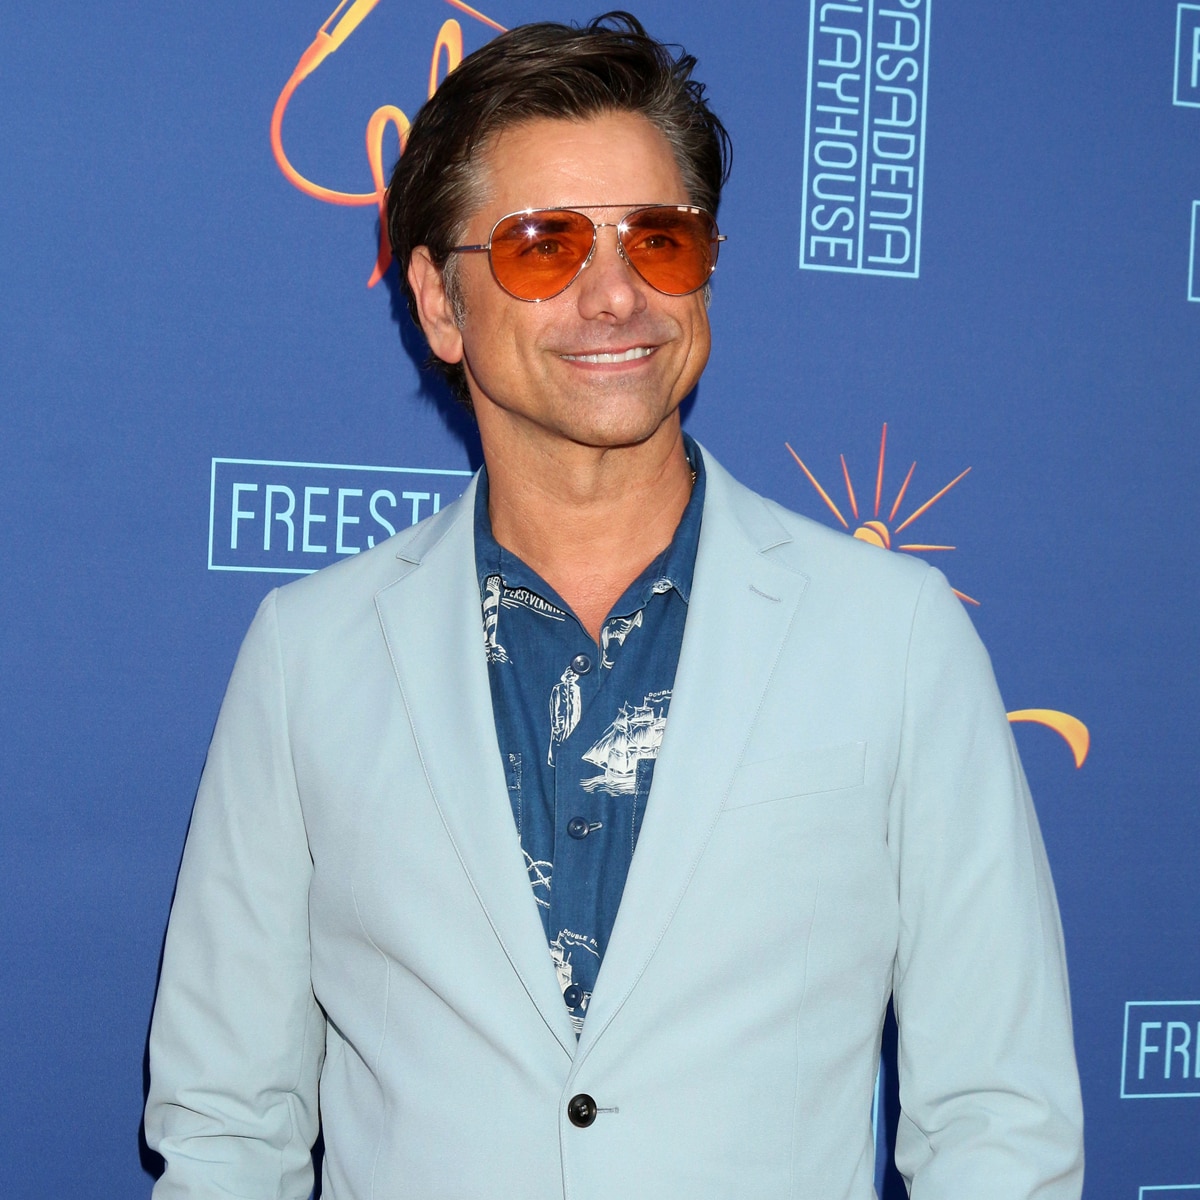 John Stamos Devastated His Full House Family Is Unraveling